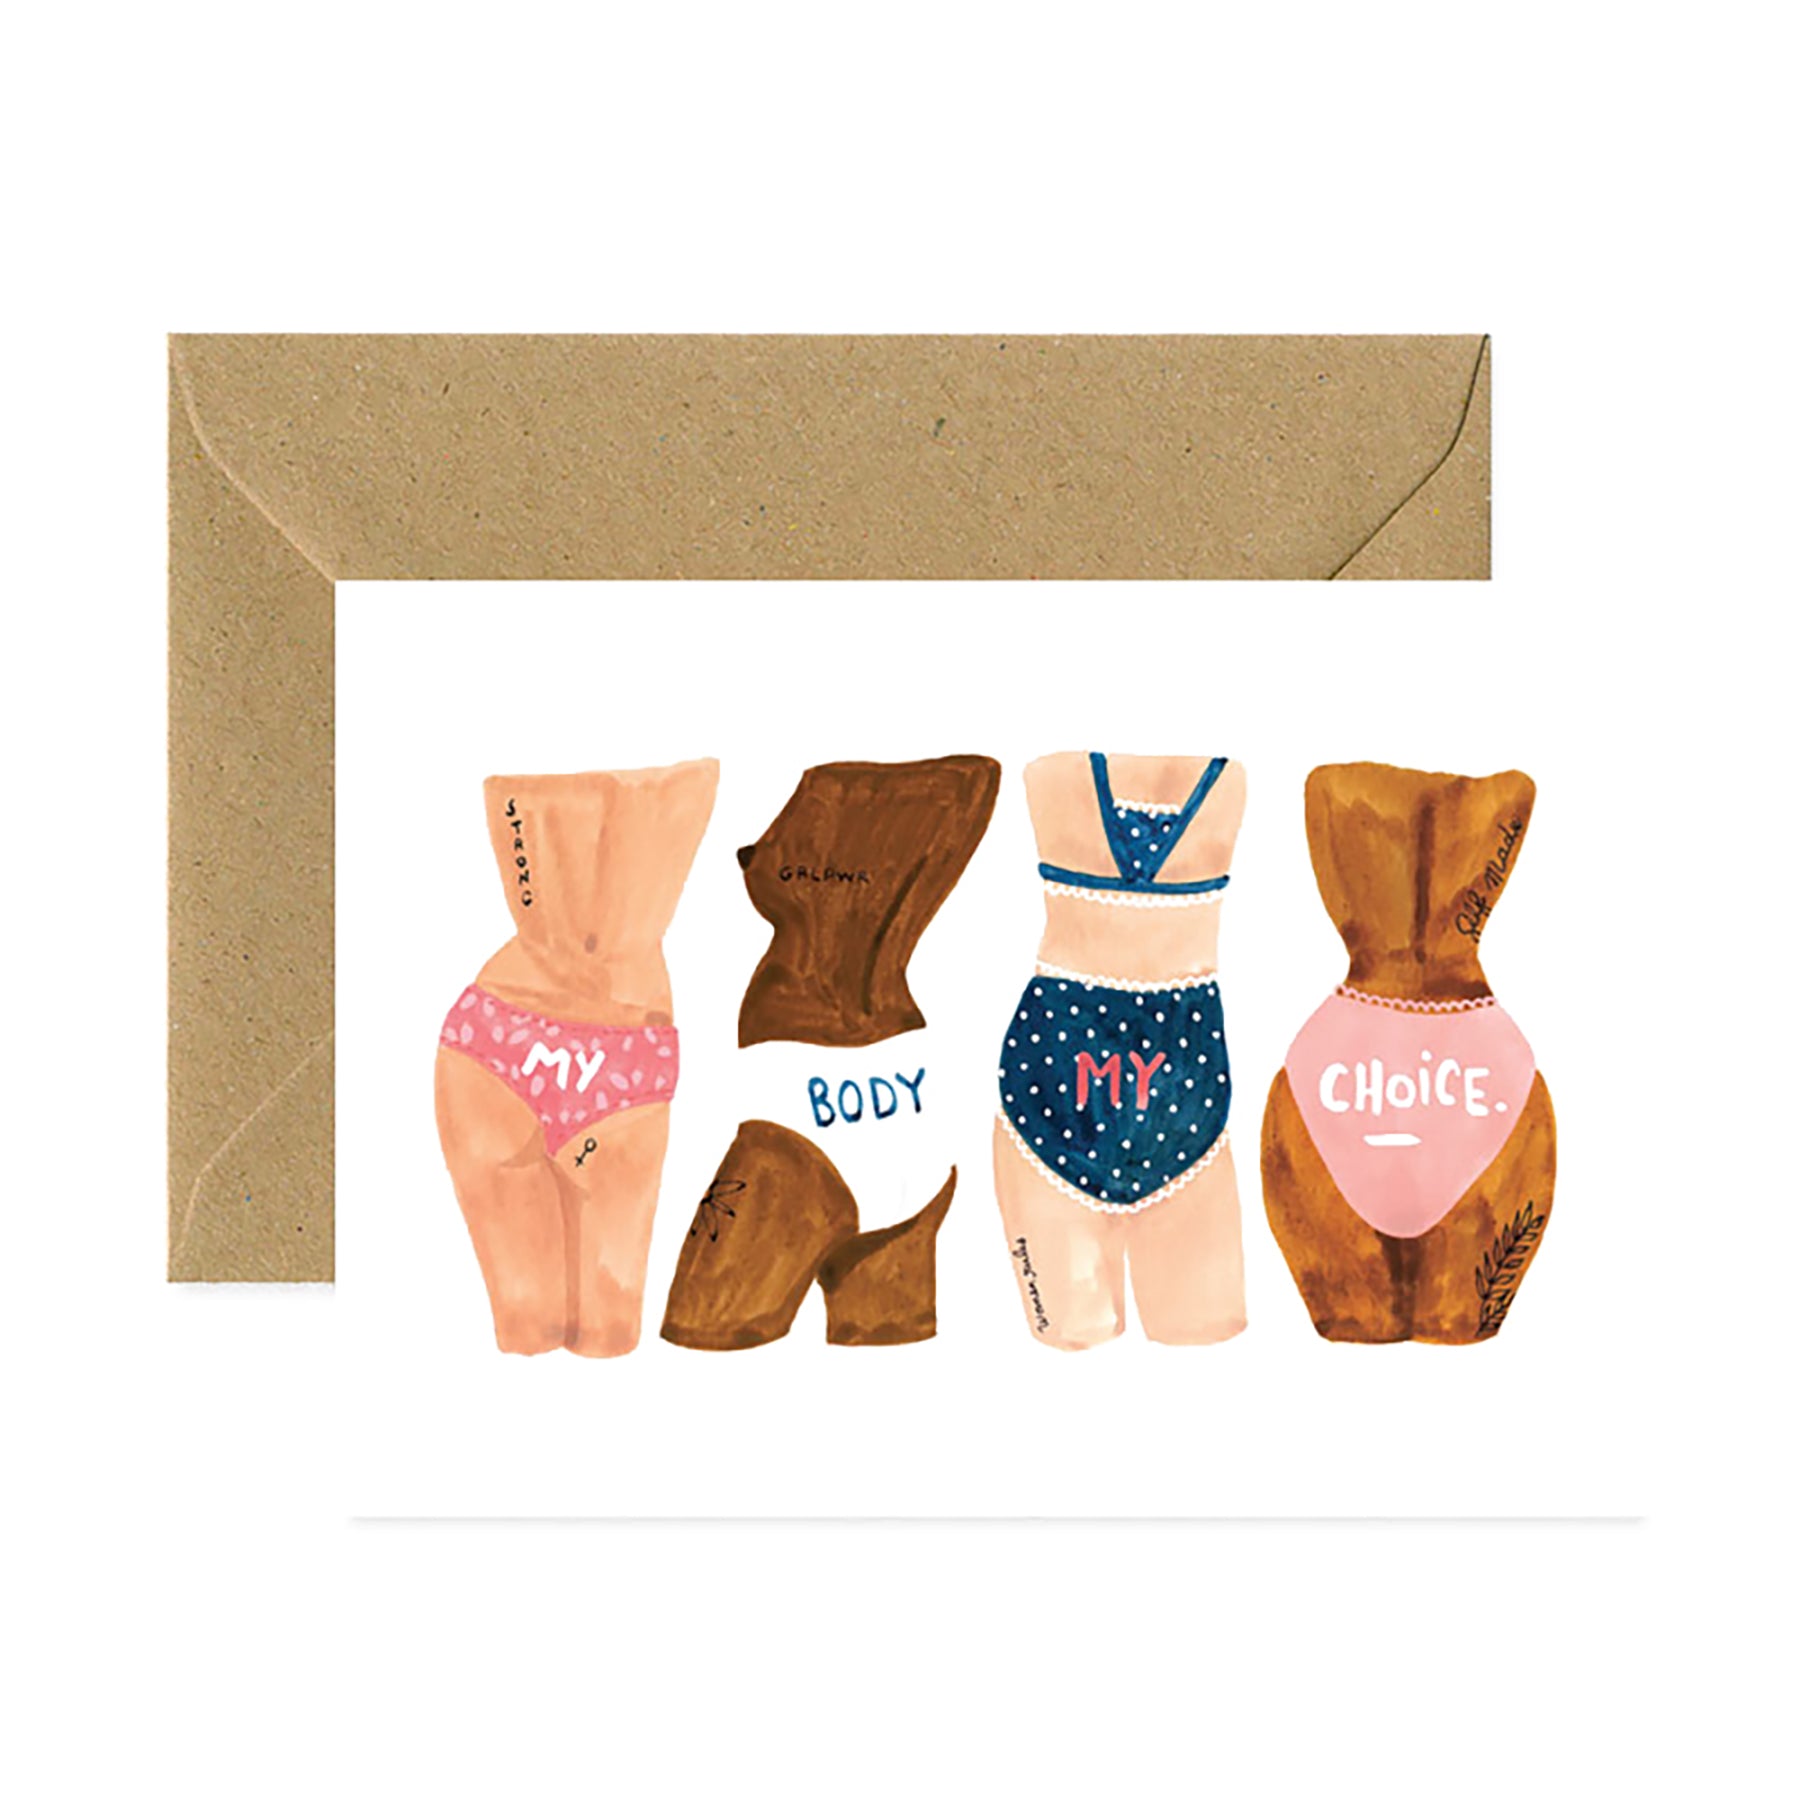 Herring & Bones - Concept Store Joyeux - All The Ways To Say - Cartes - Carte "My Body, My Choice"